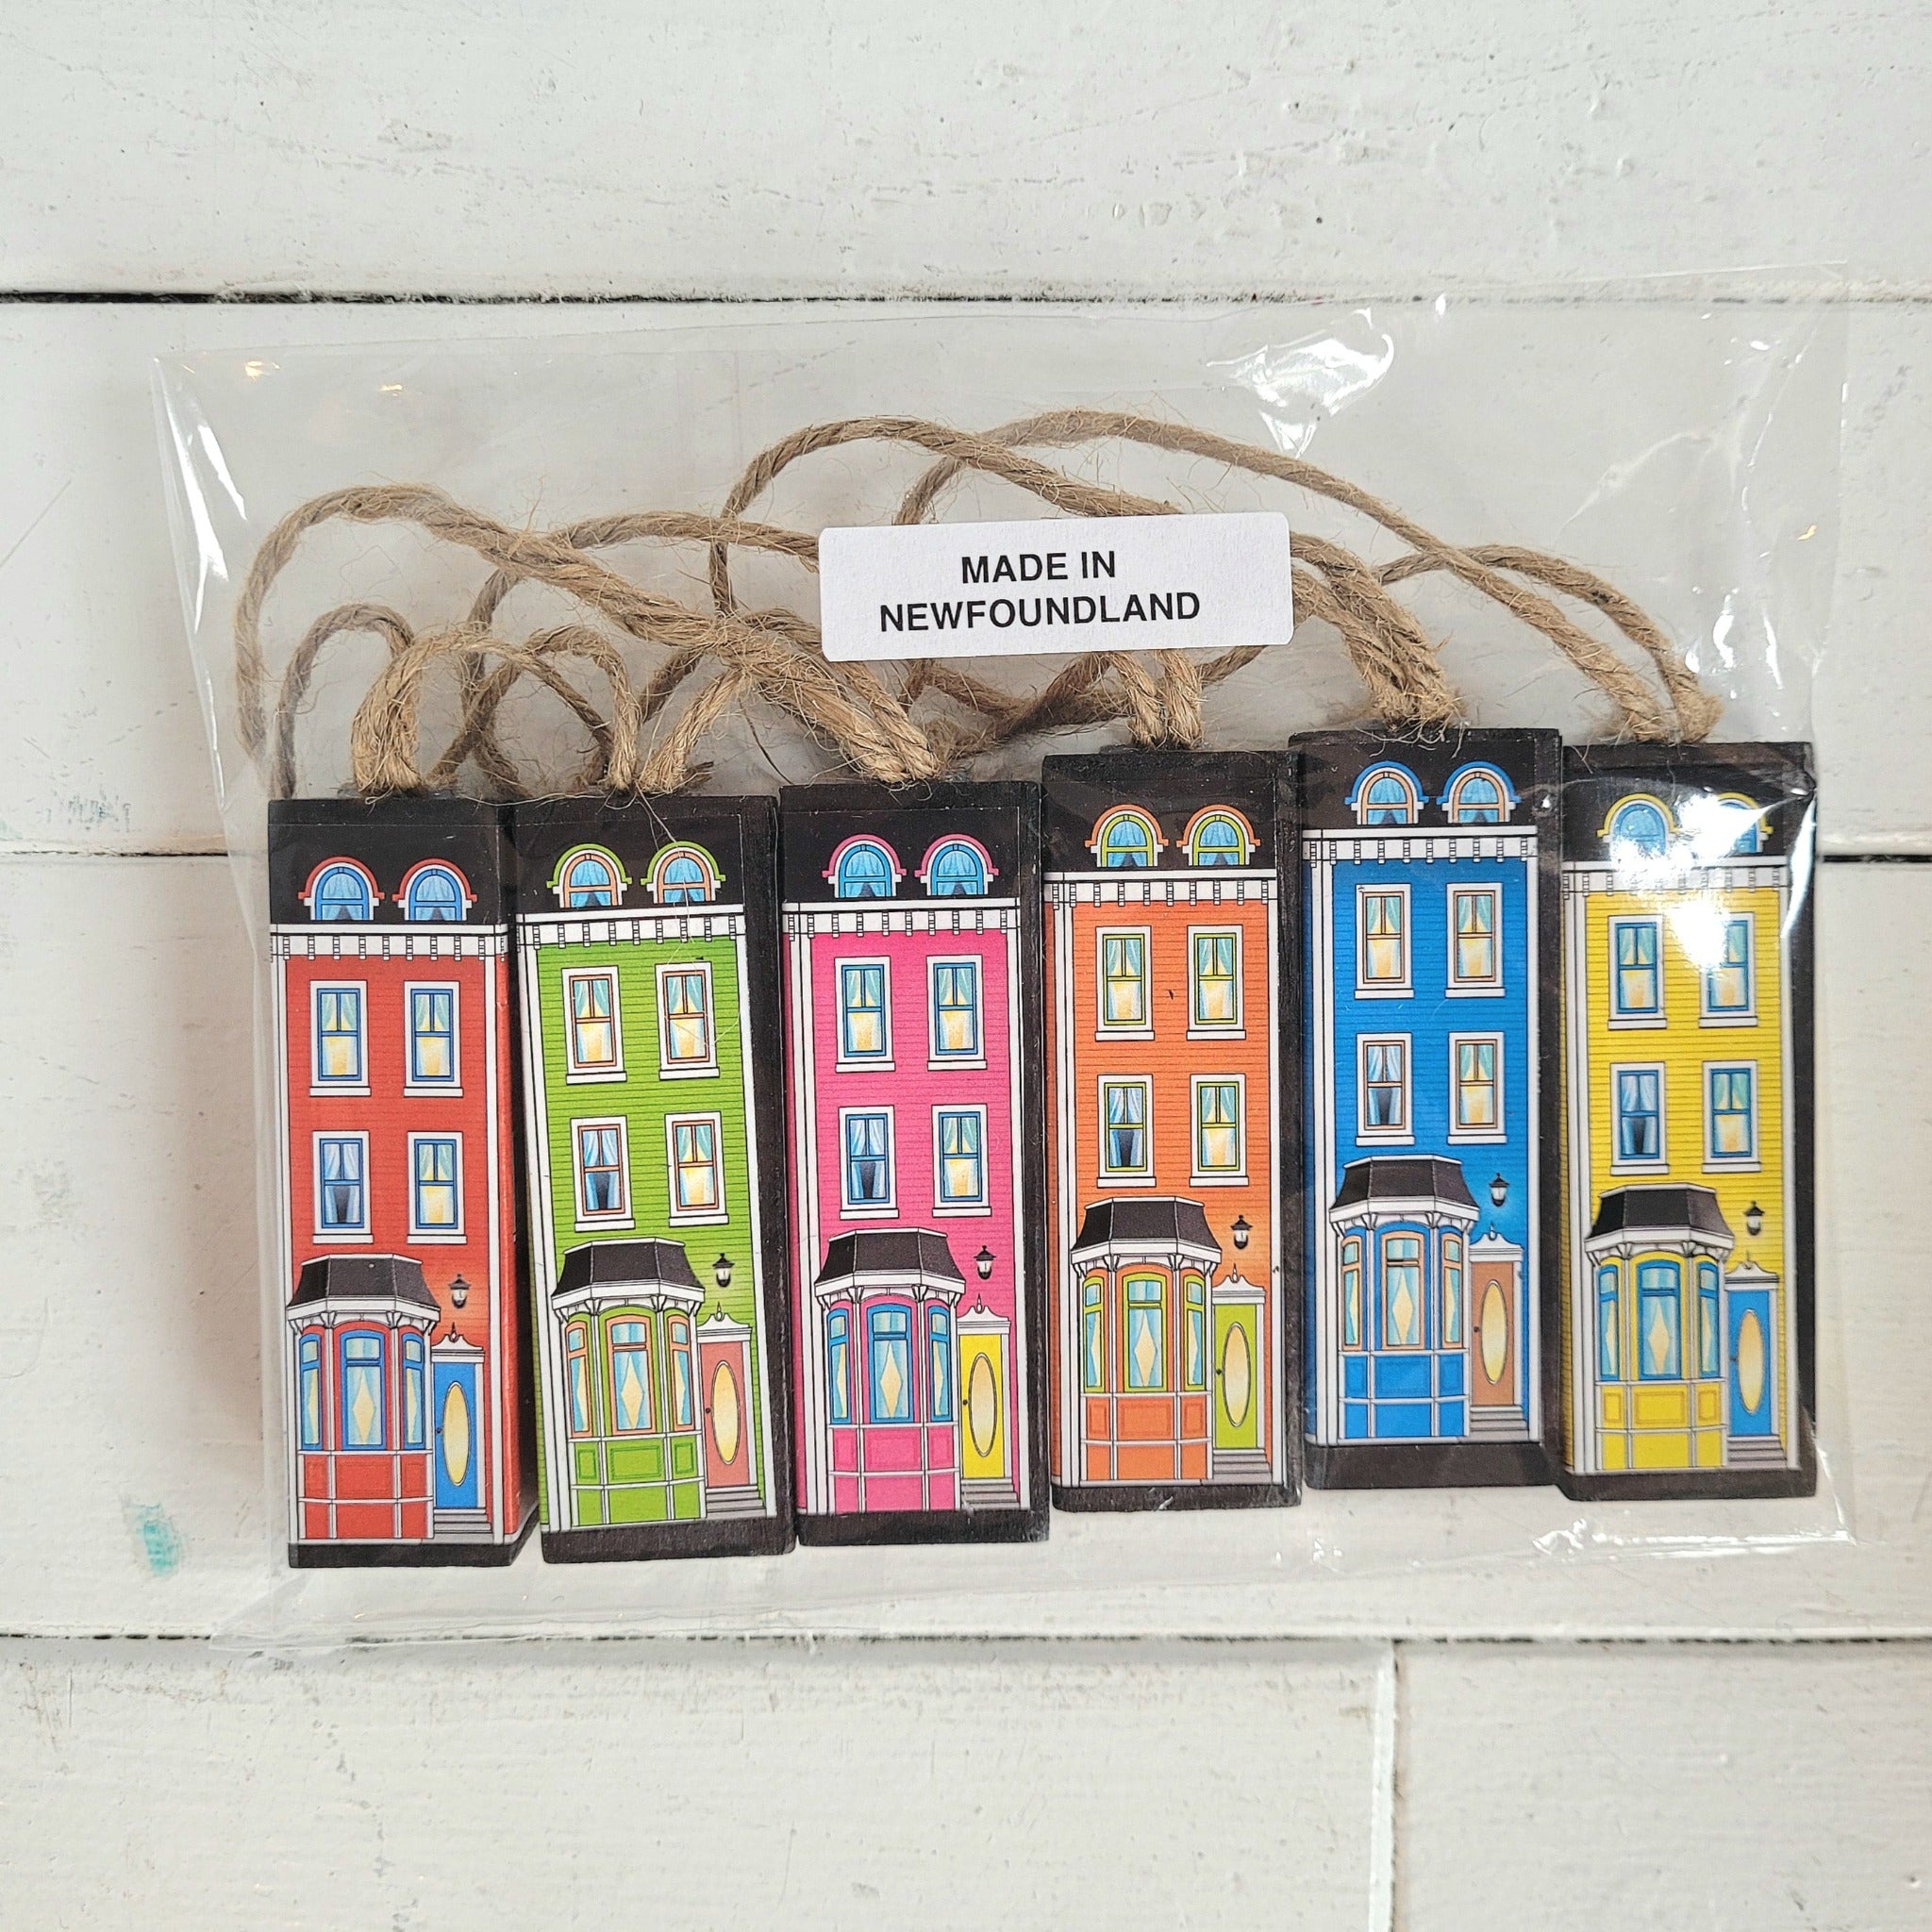 six tree ornaments featuring house designs and colors of Gower Street in St. John's and made in Newfoundland